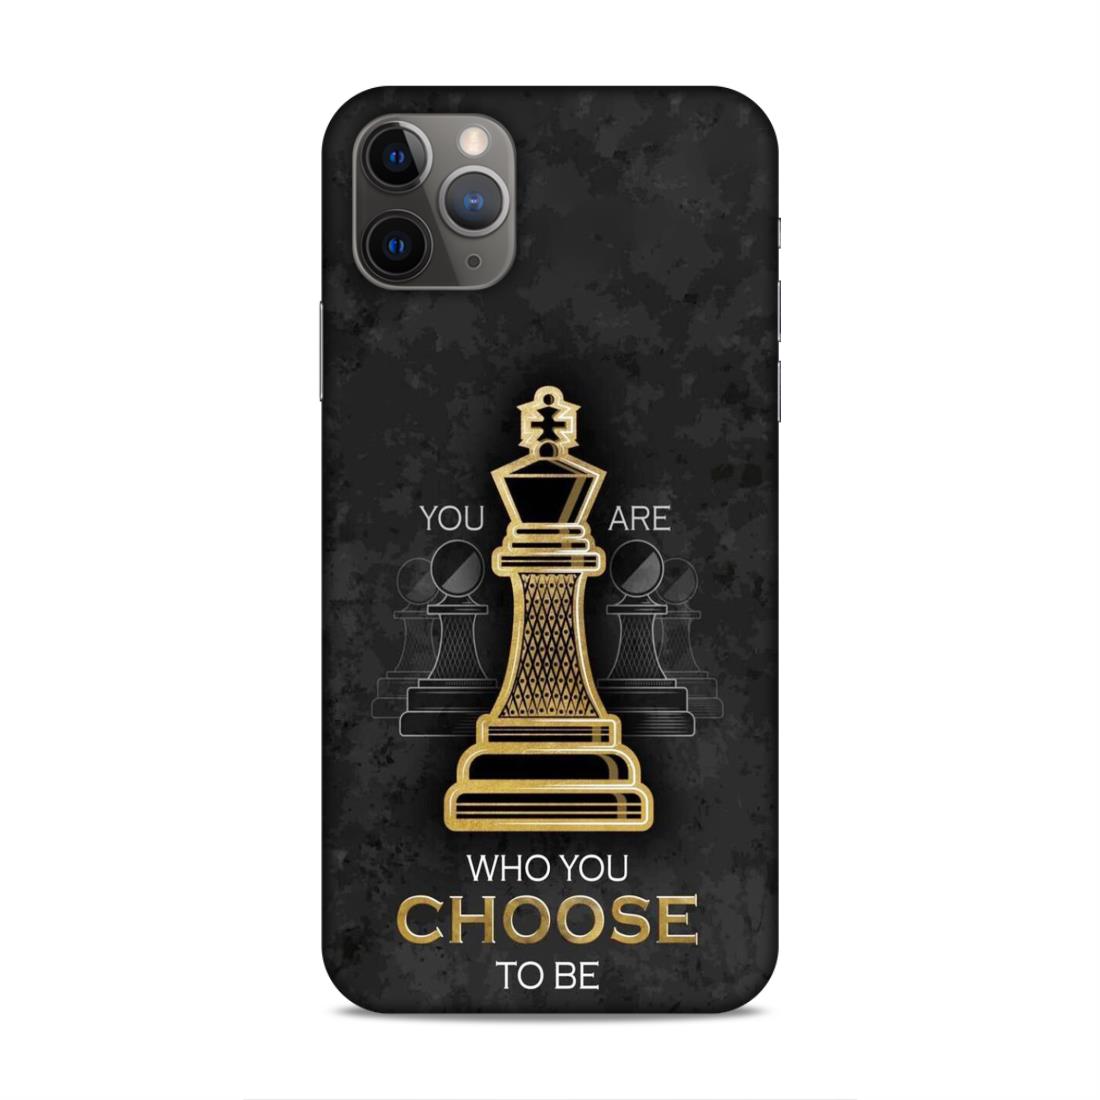 Who You Choose to Be Hard Back Case For Apple iPhone 11 Pro Max